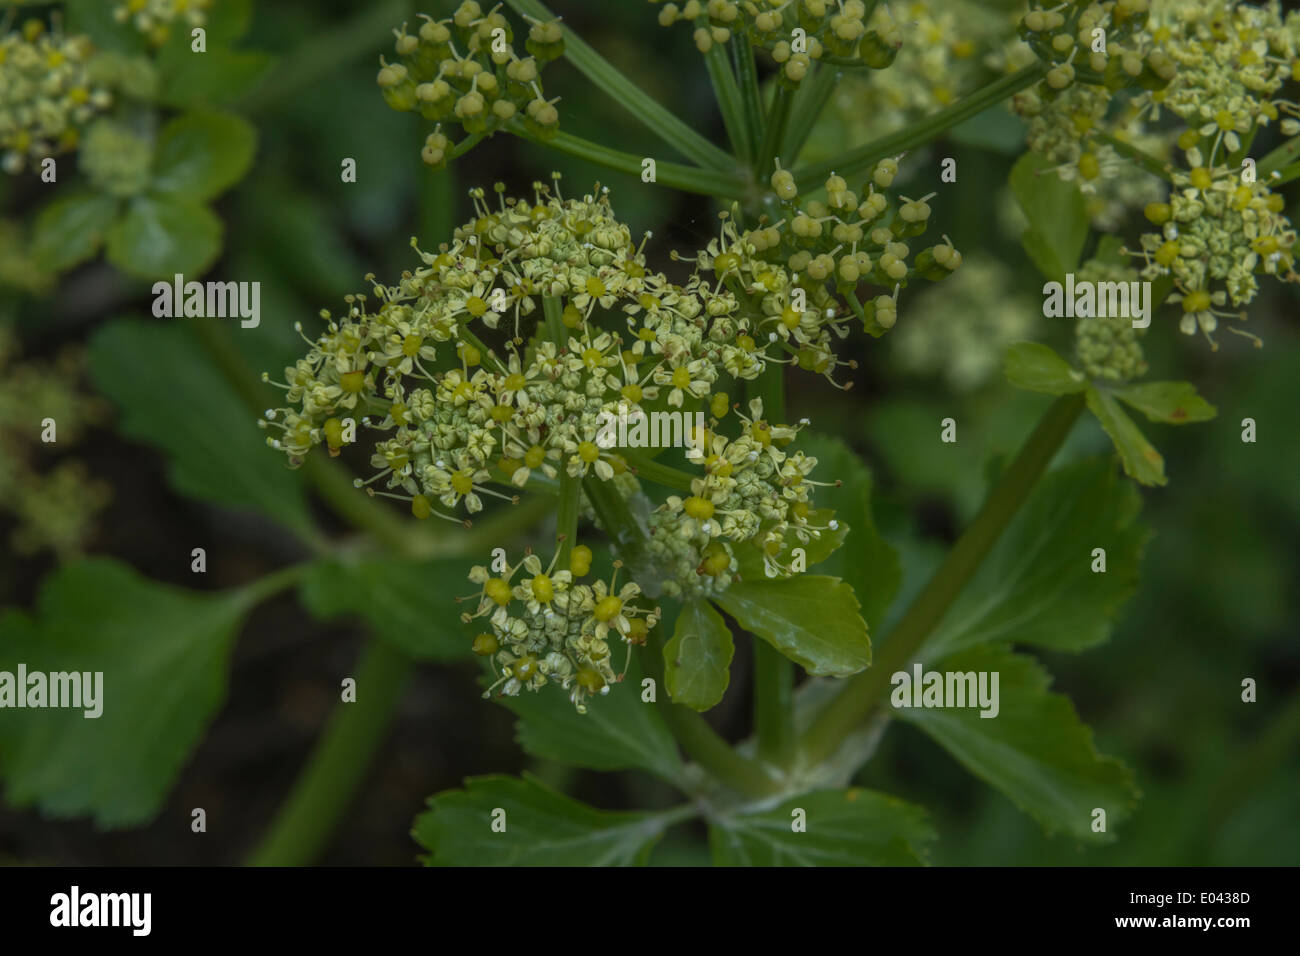 Close detail of the flowers of Alexanders / Smyrnium olusatrum. Edible wild plant. Cow parsley family. Stock Photo